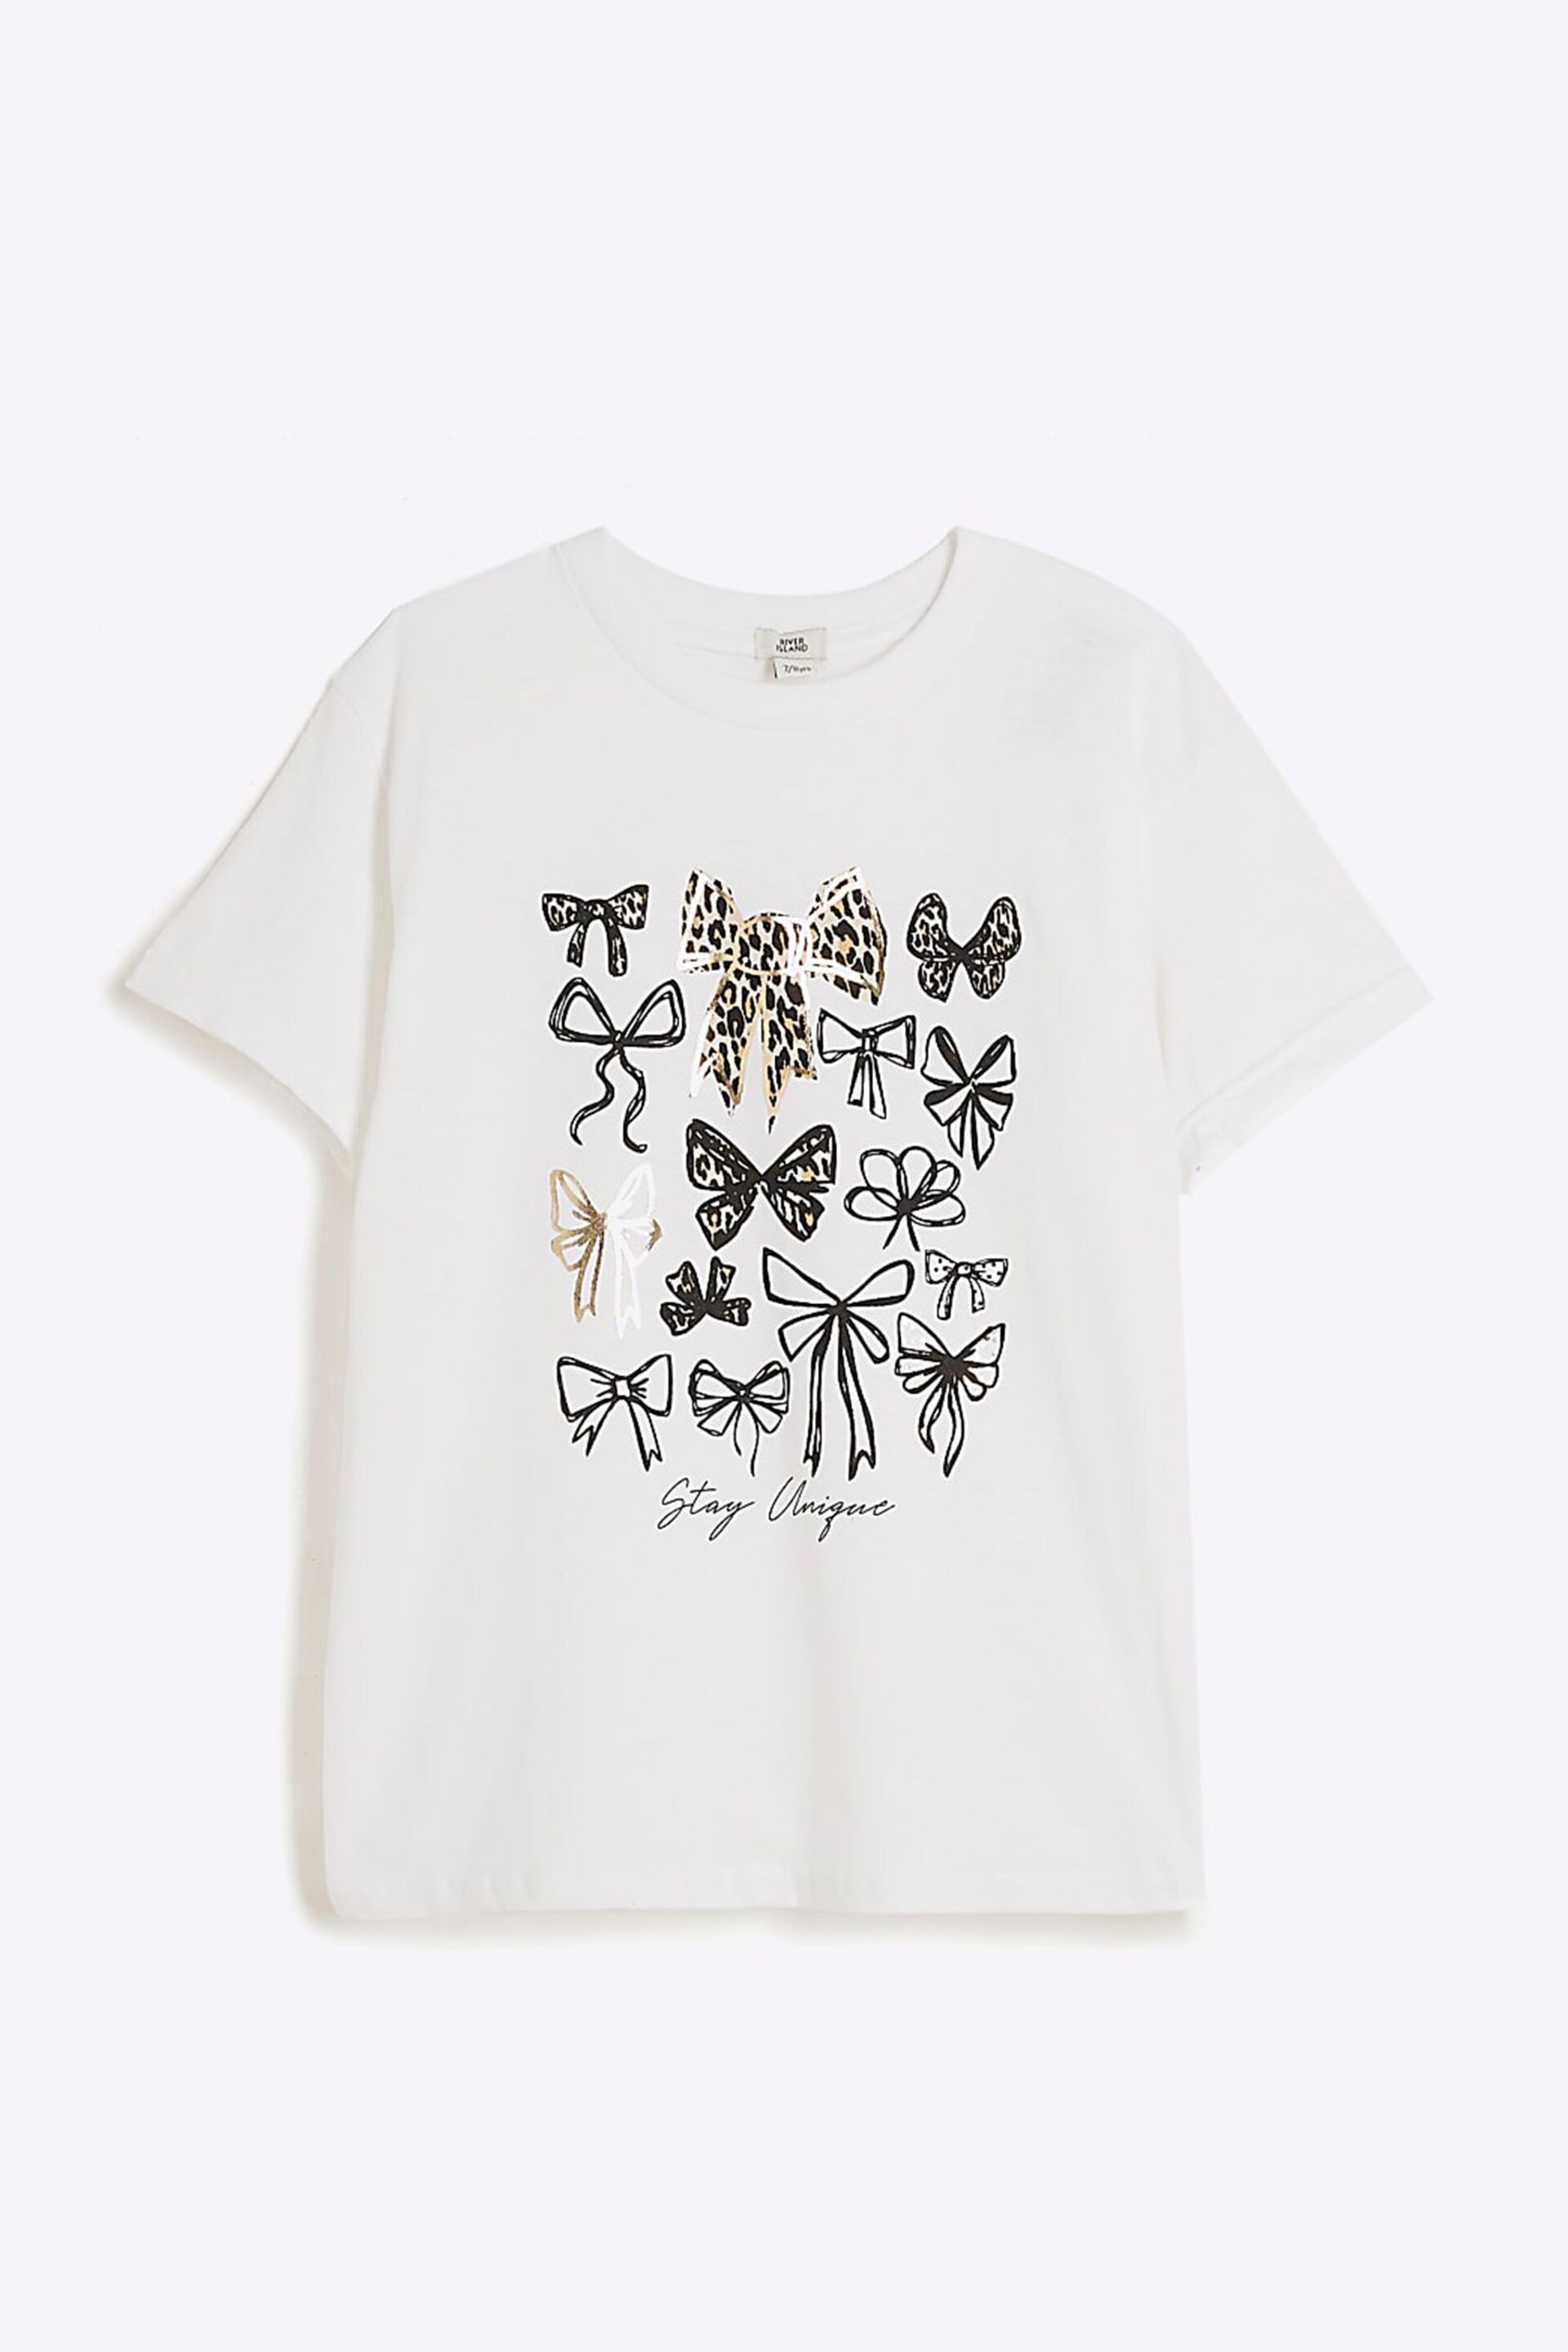 River Island White Girls Graphic Leopard Bow T-Shirt - Image 1 of 4